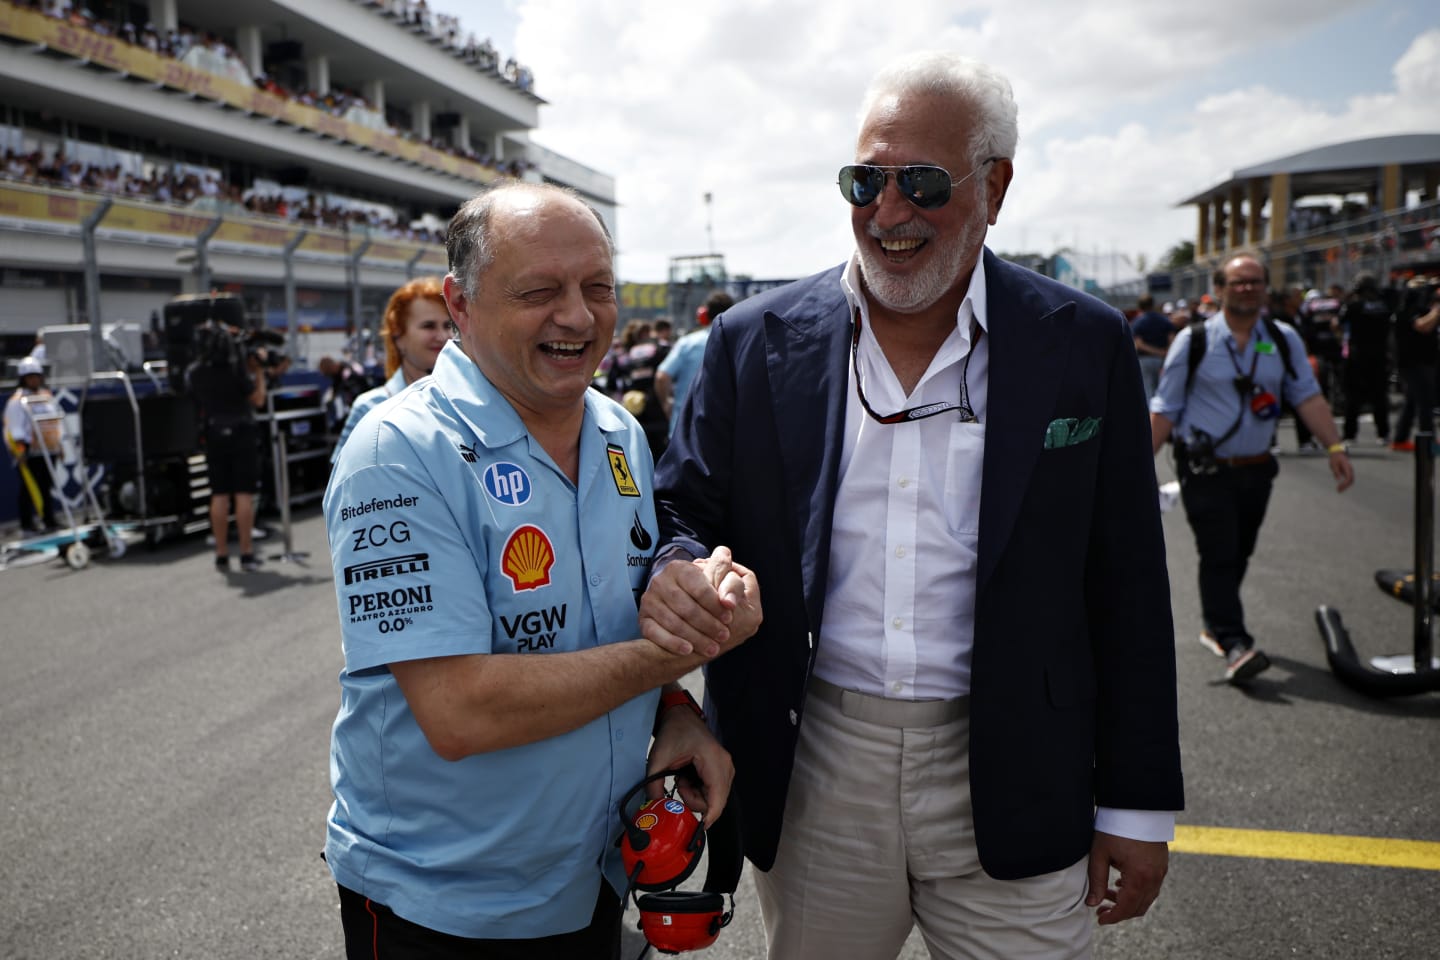 MIAMI, FLORIDA - MAY 05: Owner of Aston Martin F1 Team Lawrence Stroll shakes hands with Ferrari